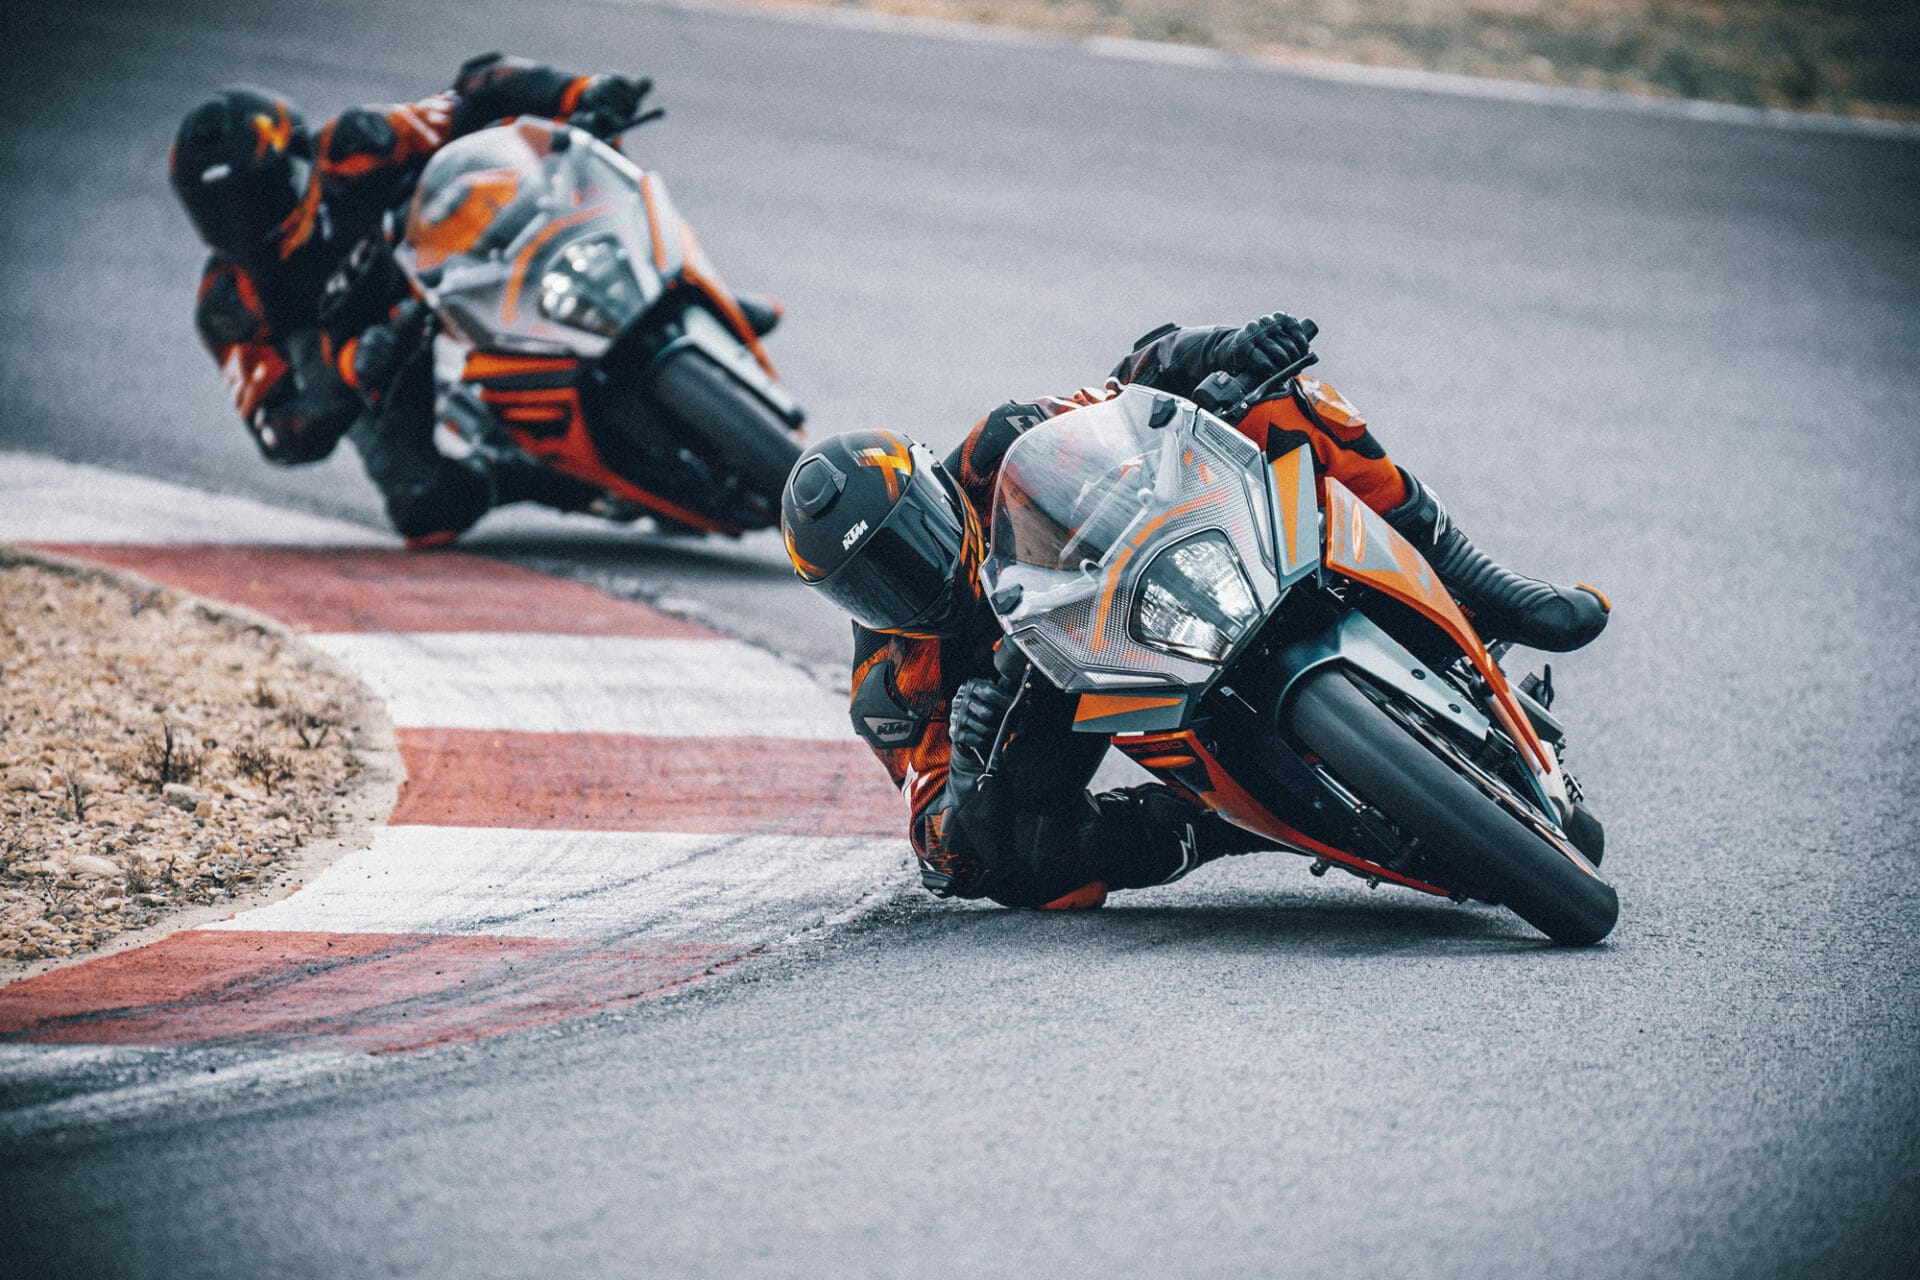 KTM RC 390 and RC 125 presented
- also in the MOTORCYCLES.NEWS APP